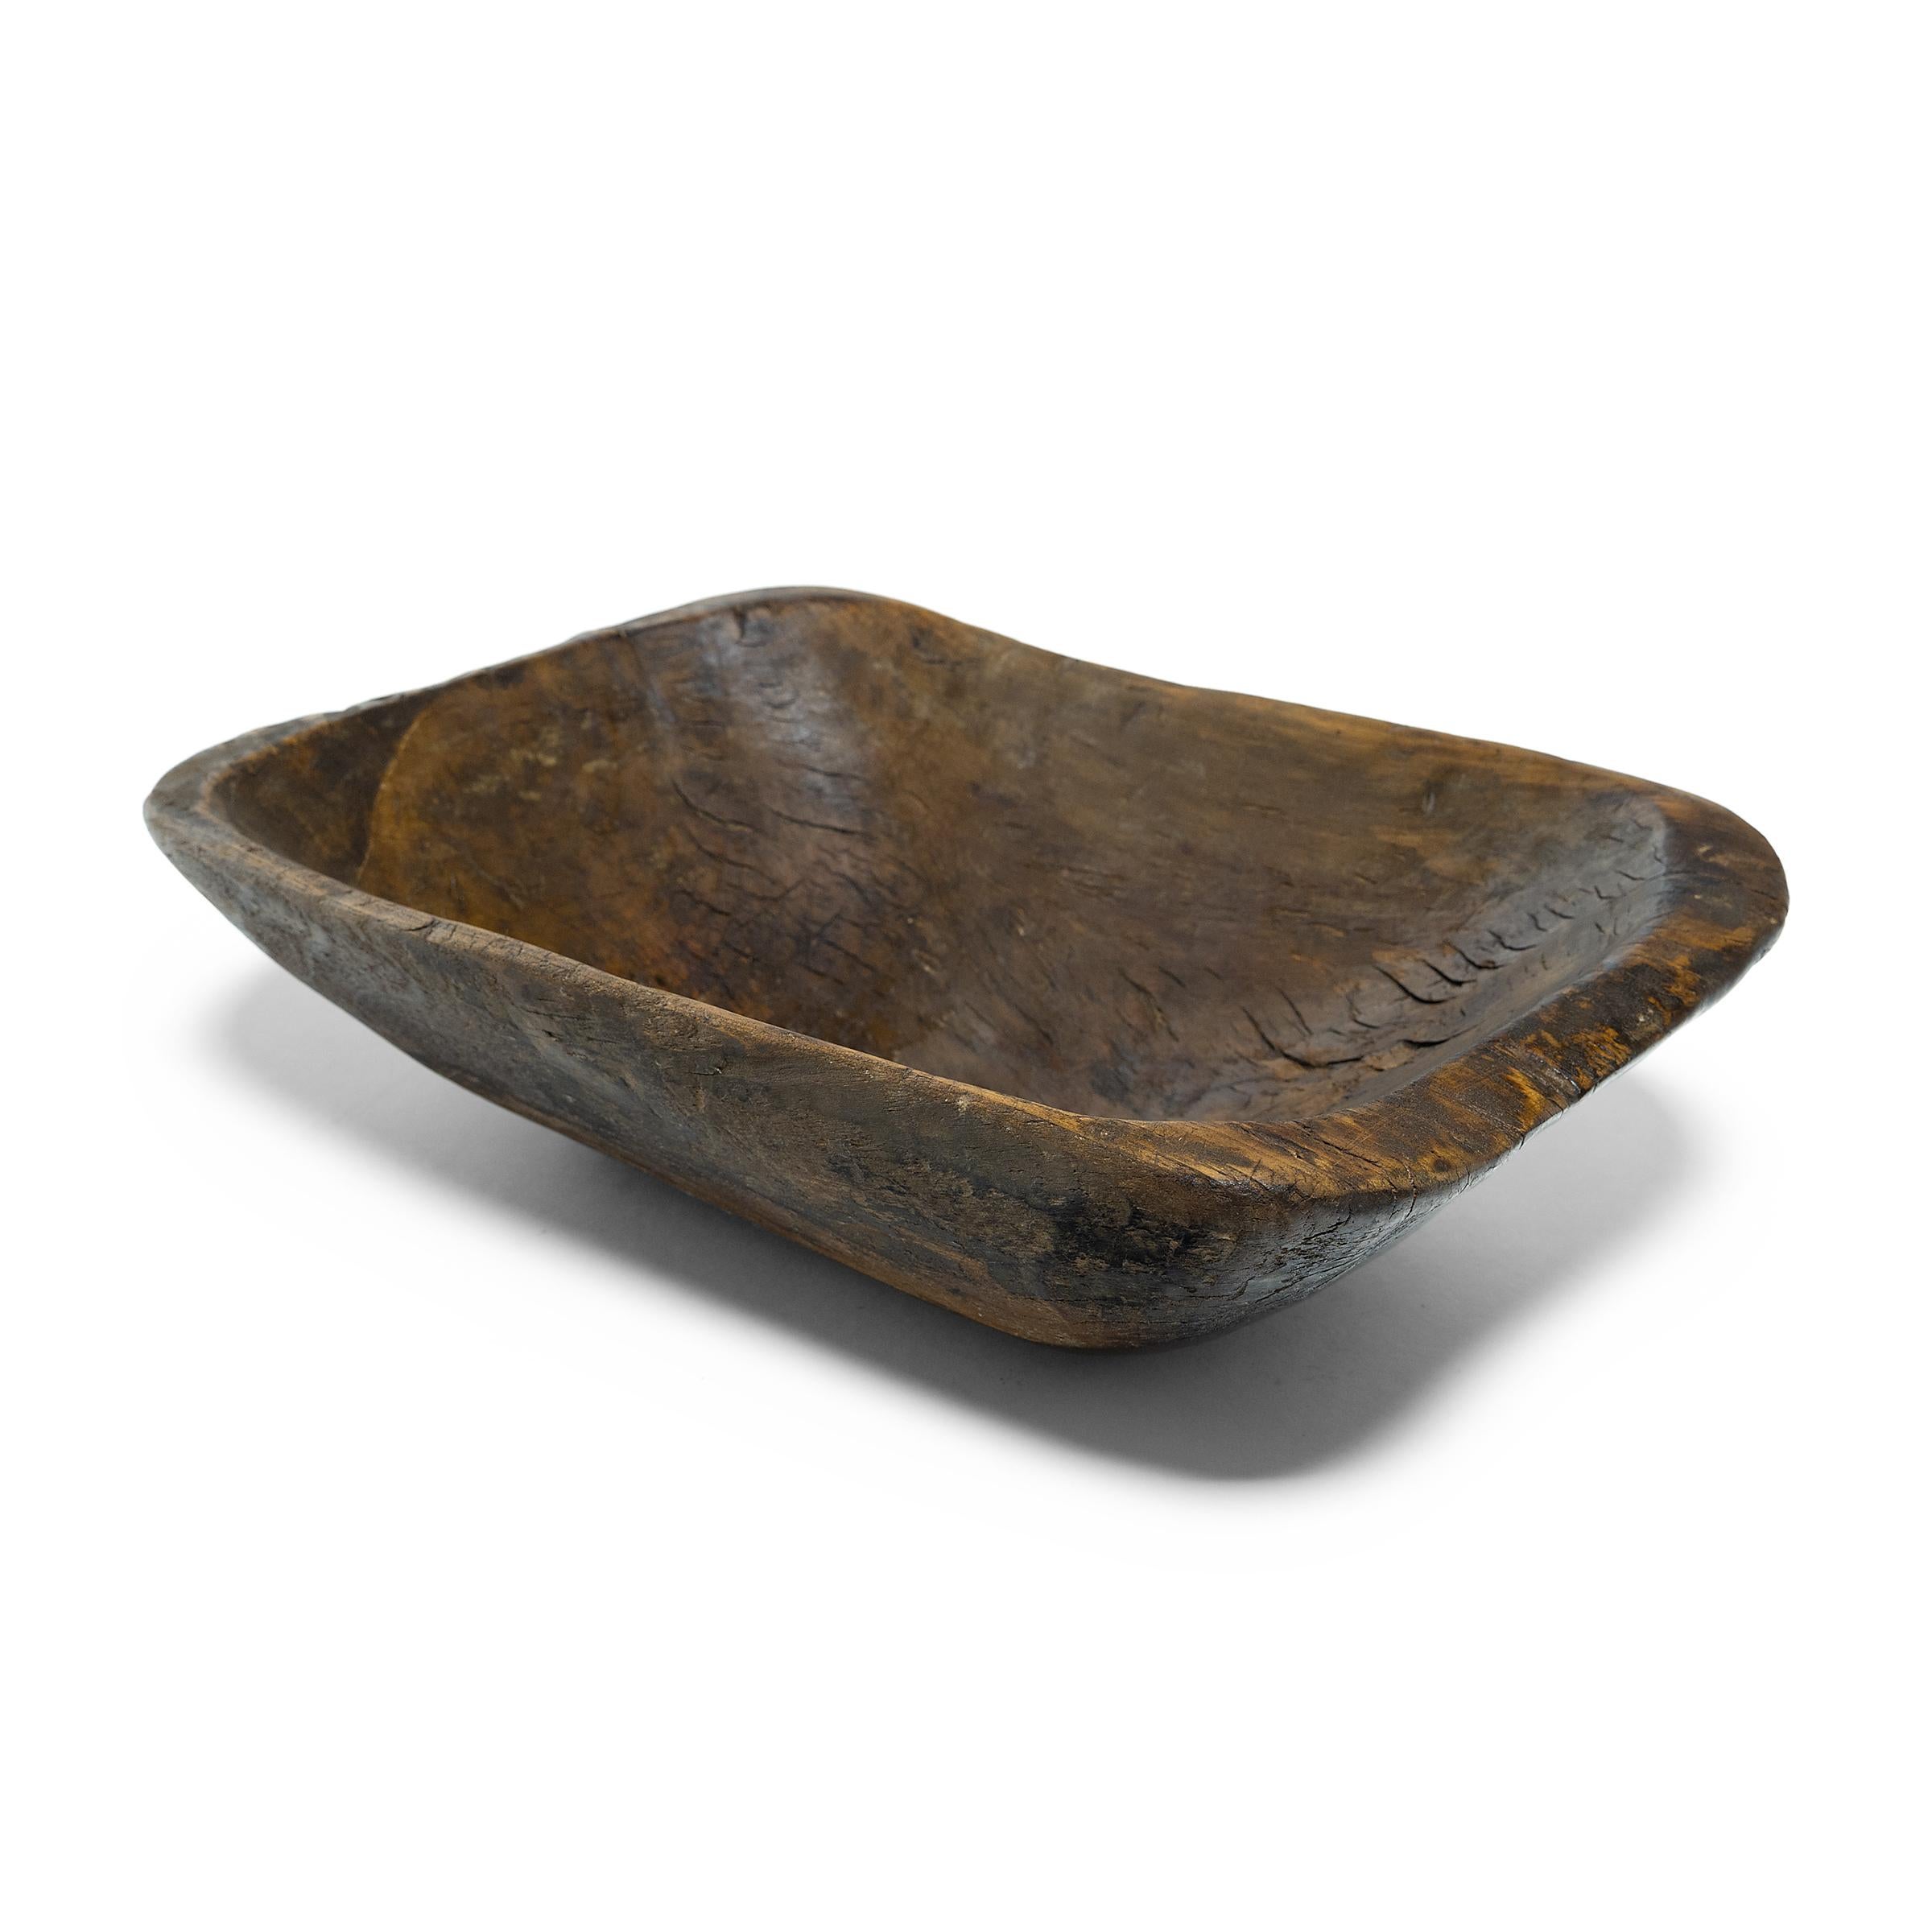 This wooden farm tray from northern China charms with its rustic finish and asymmetrical form. Hand-carved from a single block of wood, the large tray is truly one-of-a-kind, shaped with curved edges, tapered sides, and a deep interior basin. Years